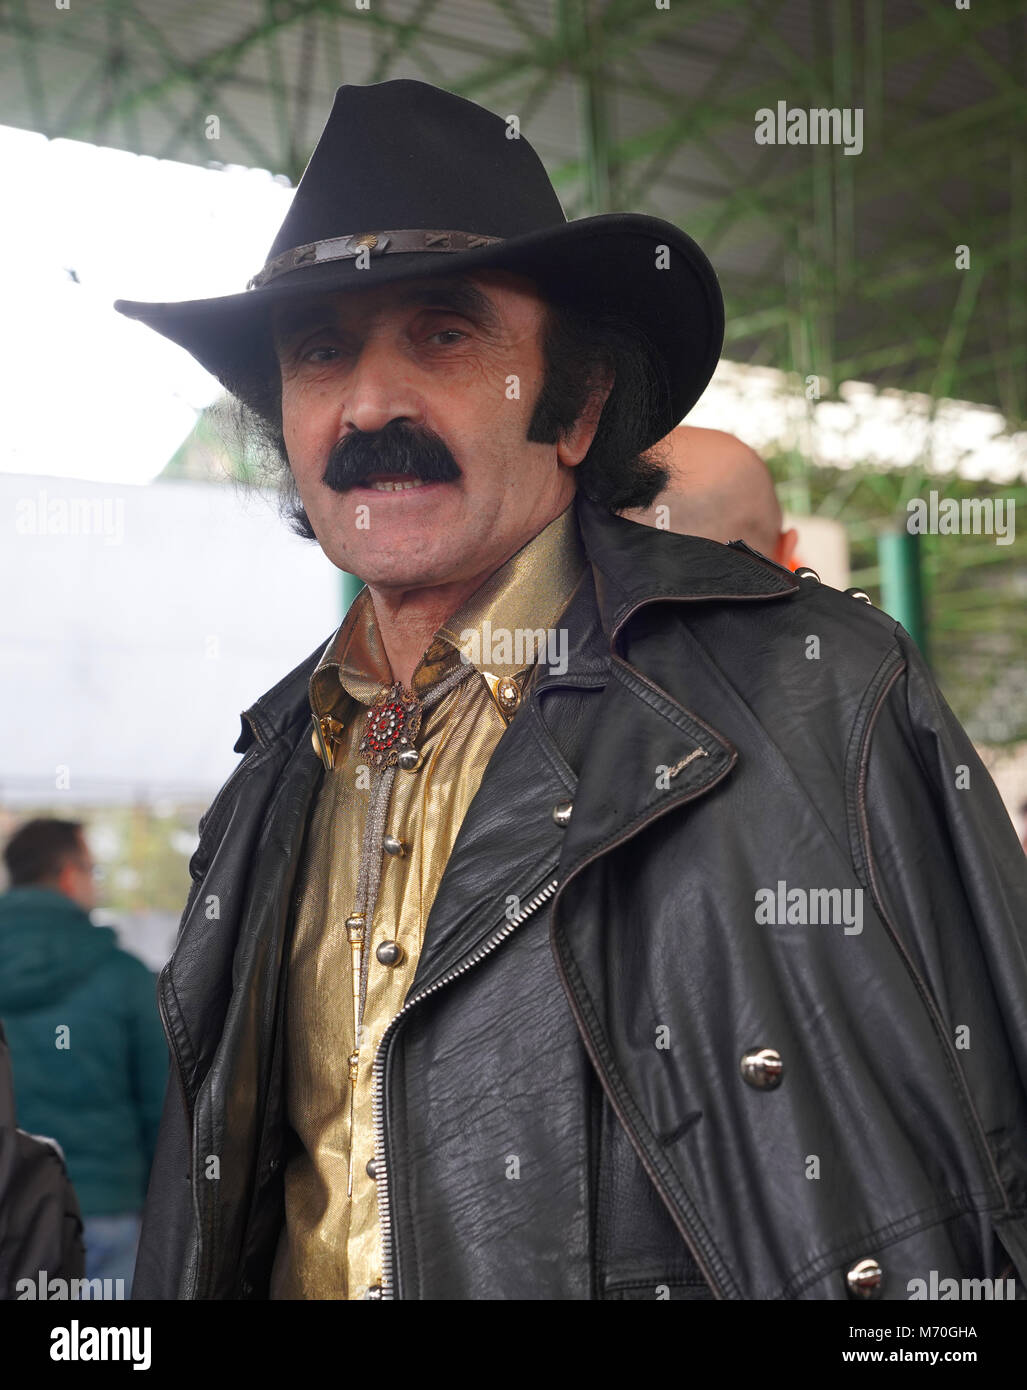 Dark man with a mustache in leather jacket in cowboy hat Stock Photo